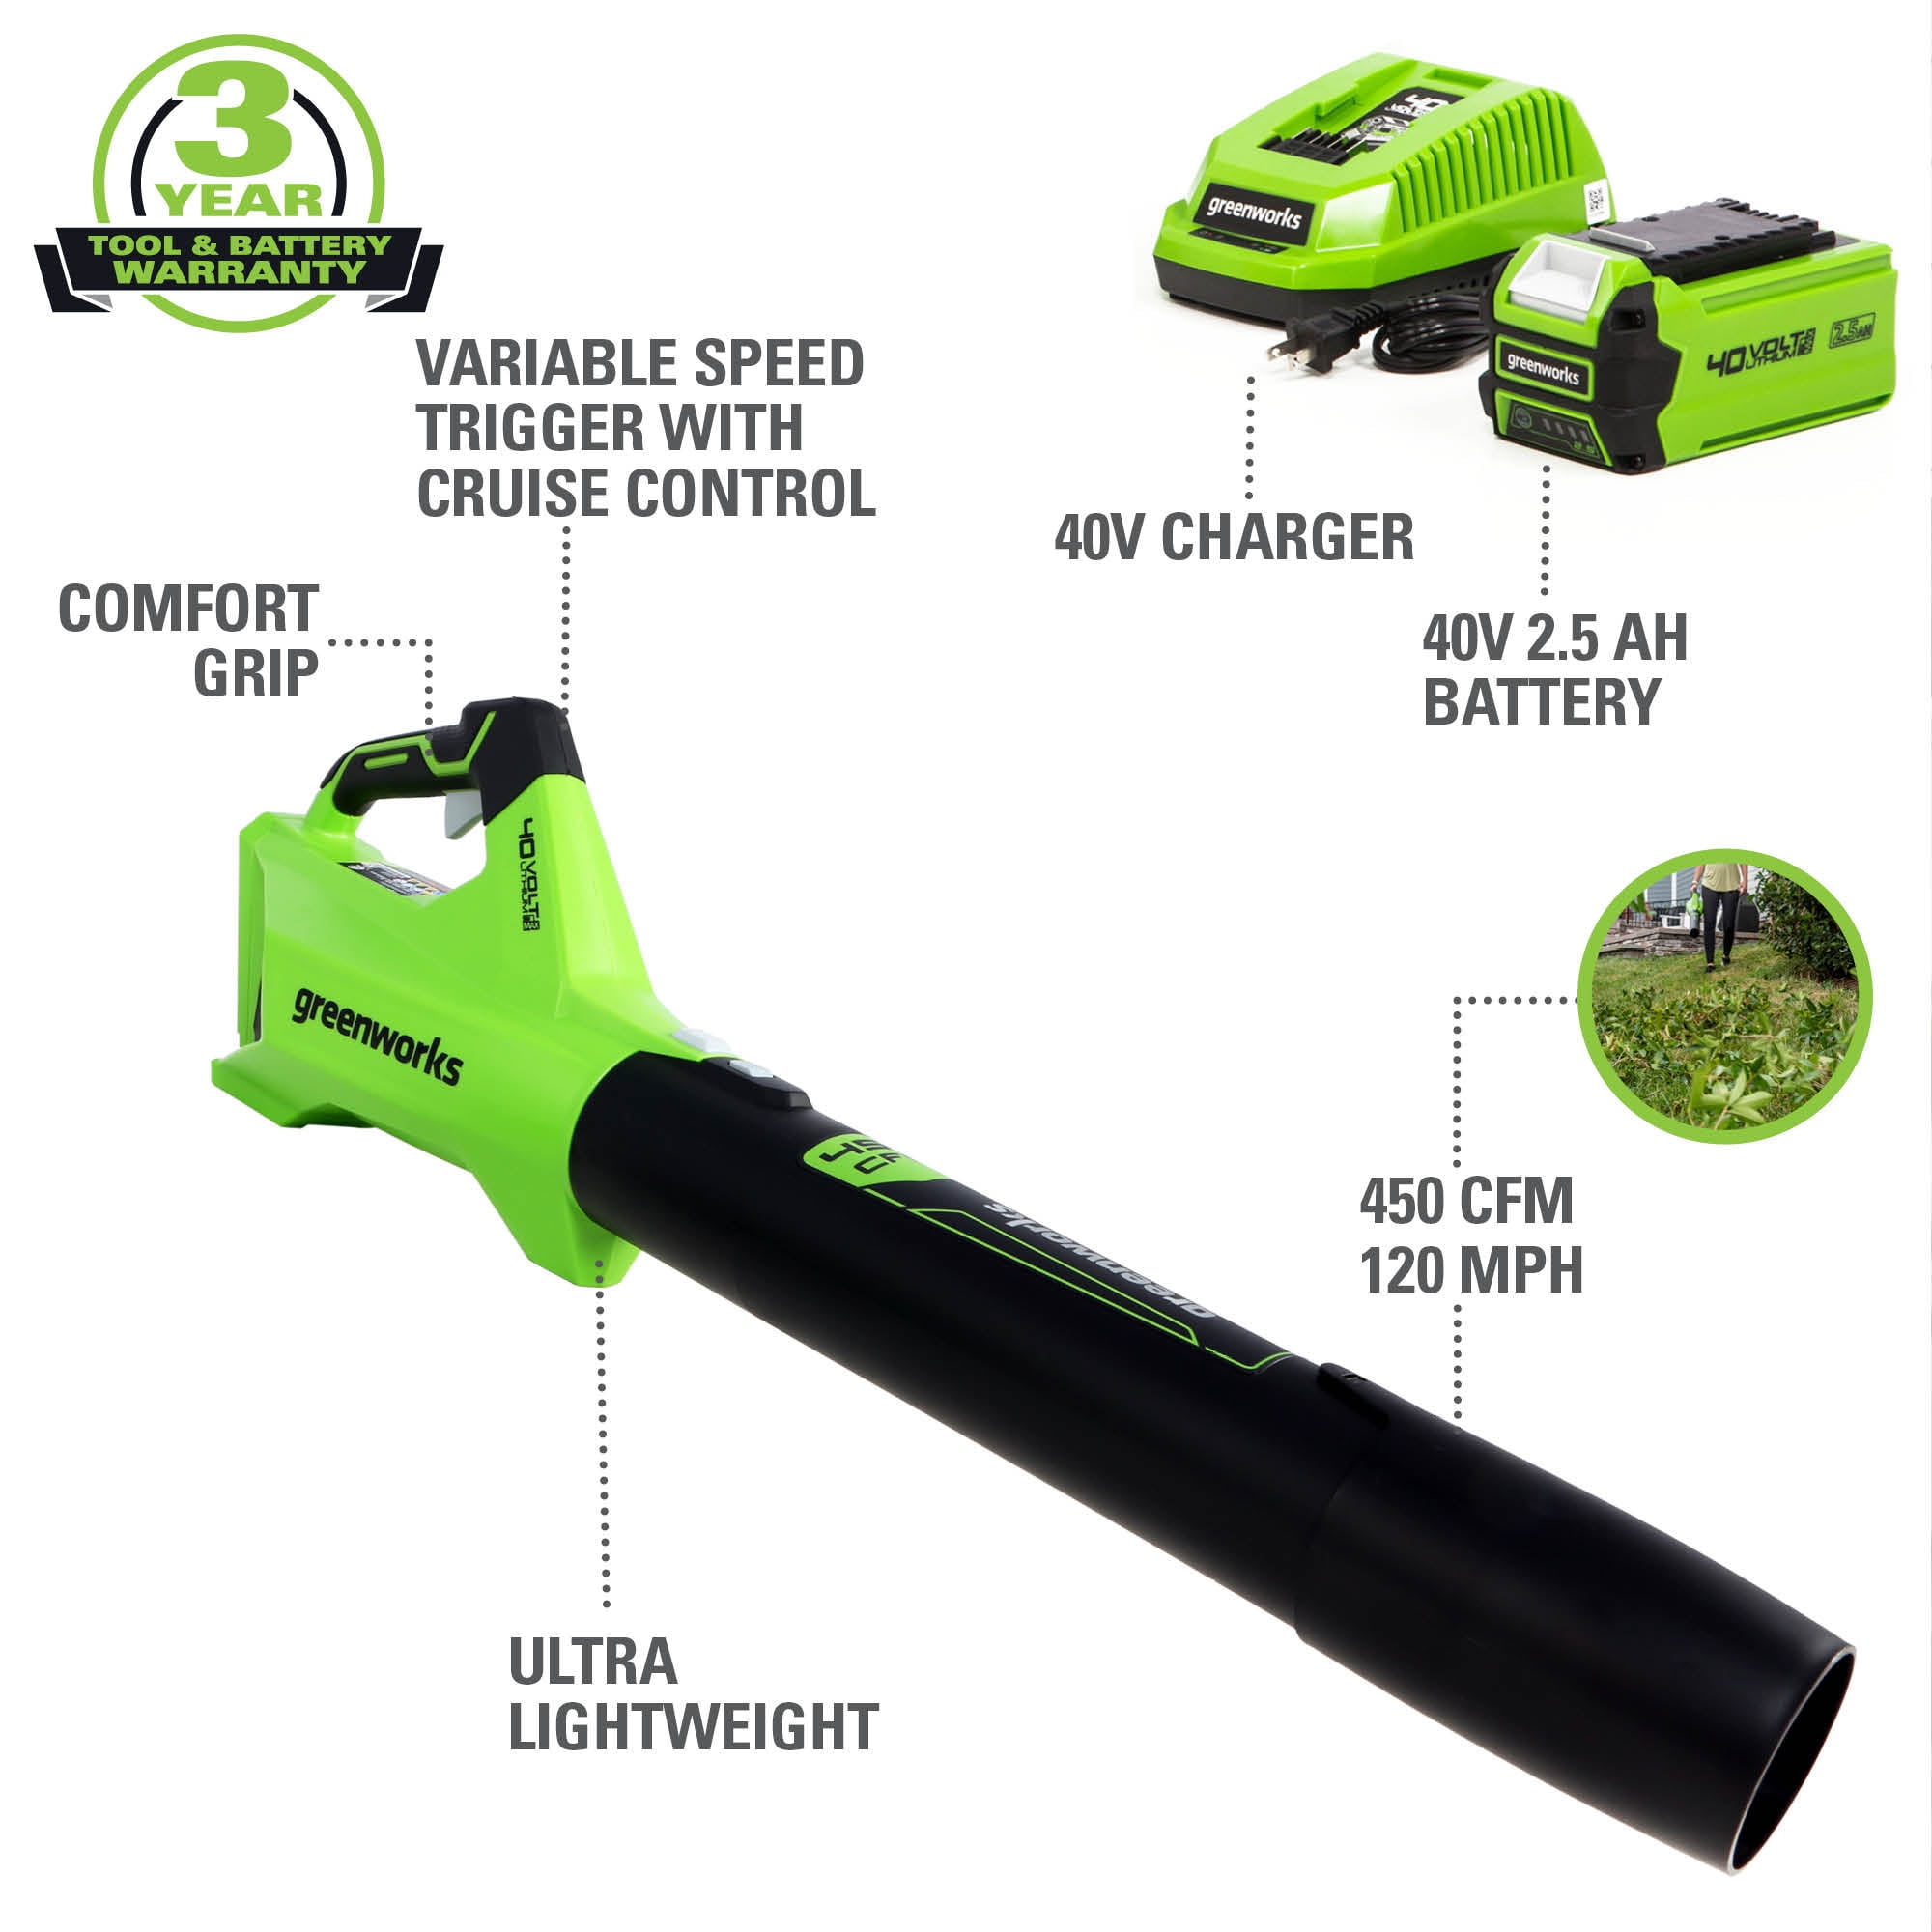 Greenworks 40V (120 mph / 450 cfm) Axial Blower, 2.5Ah Battery and Charger  –